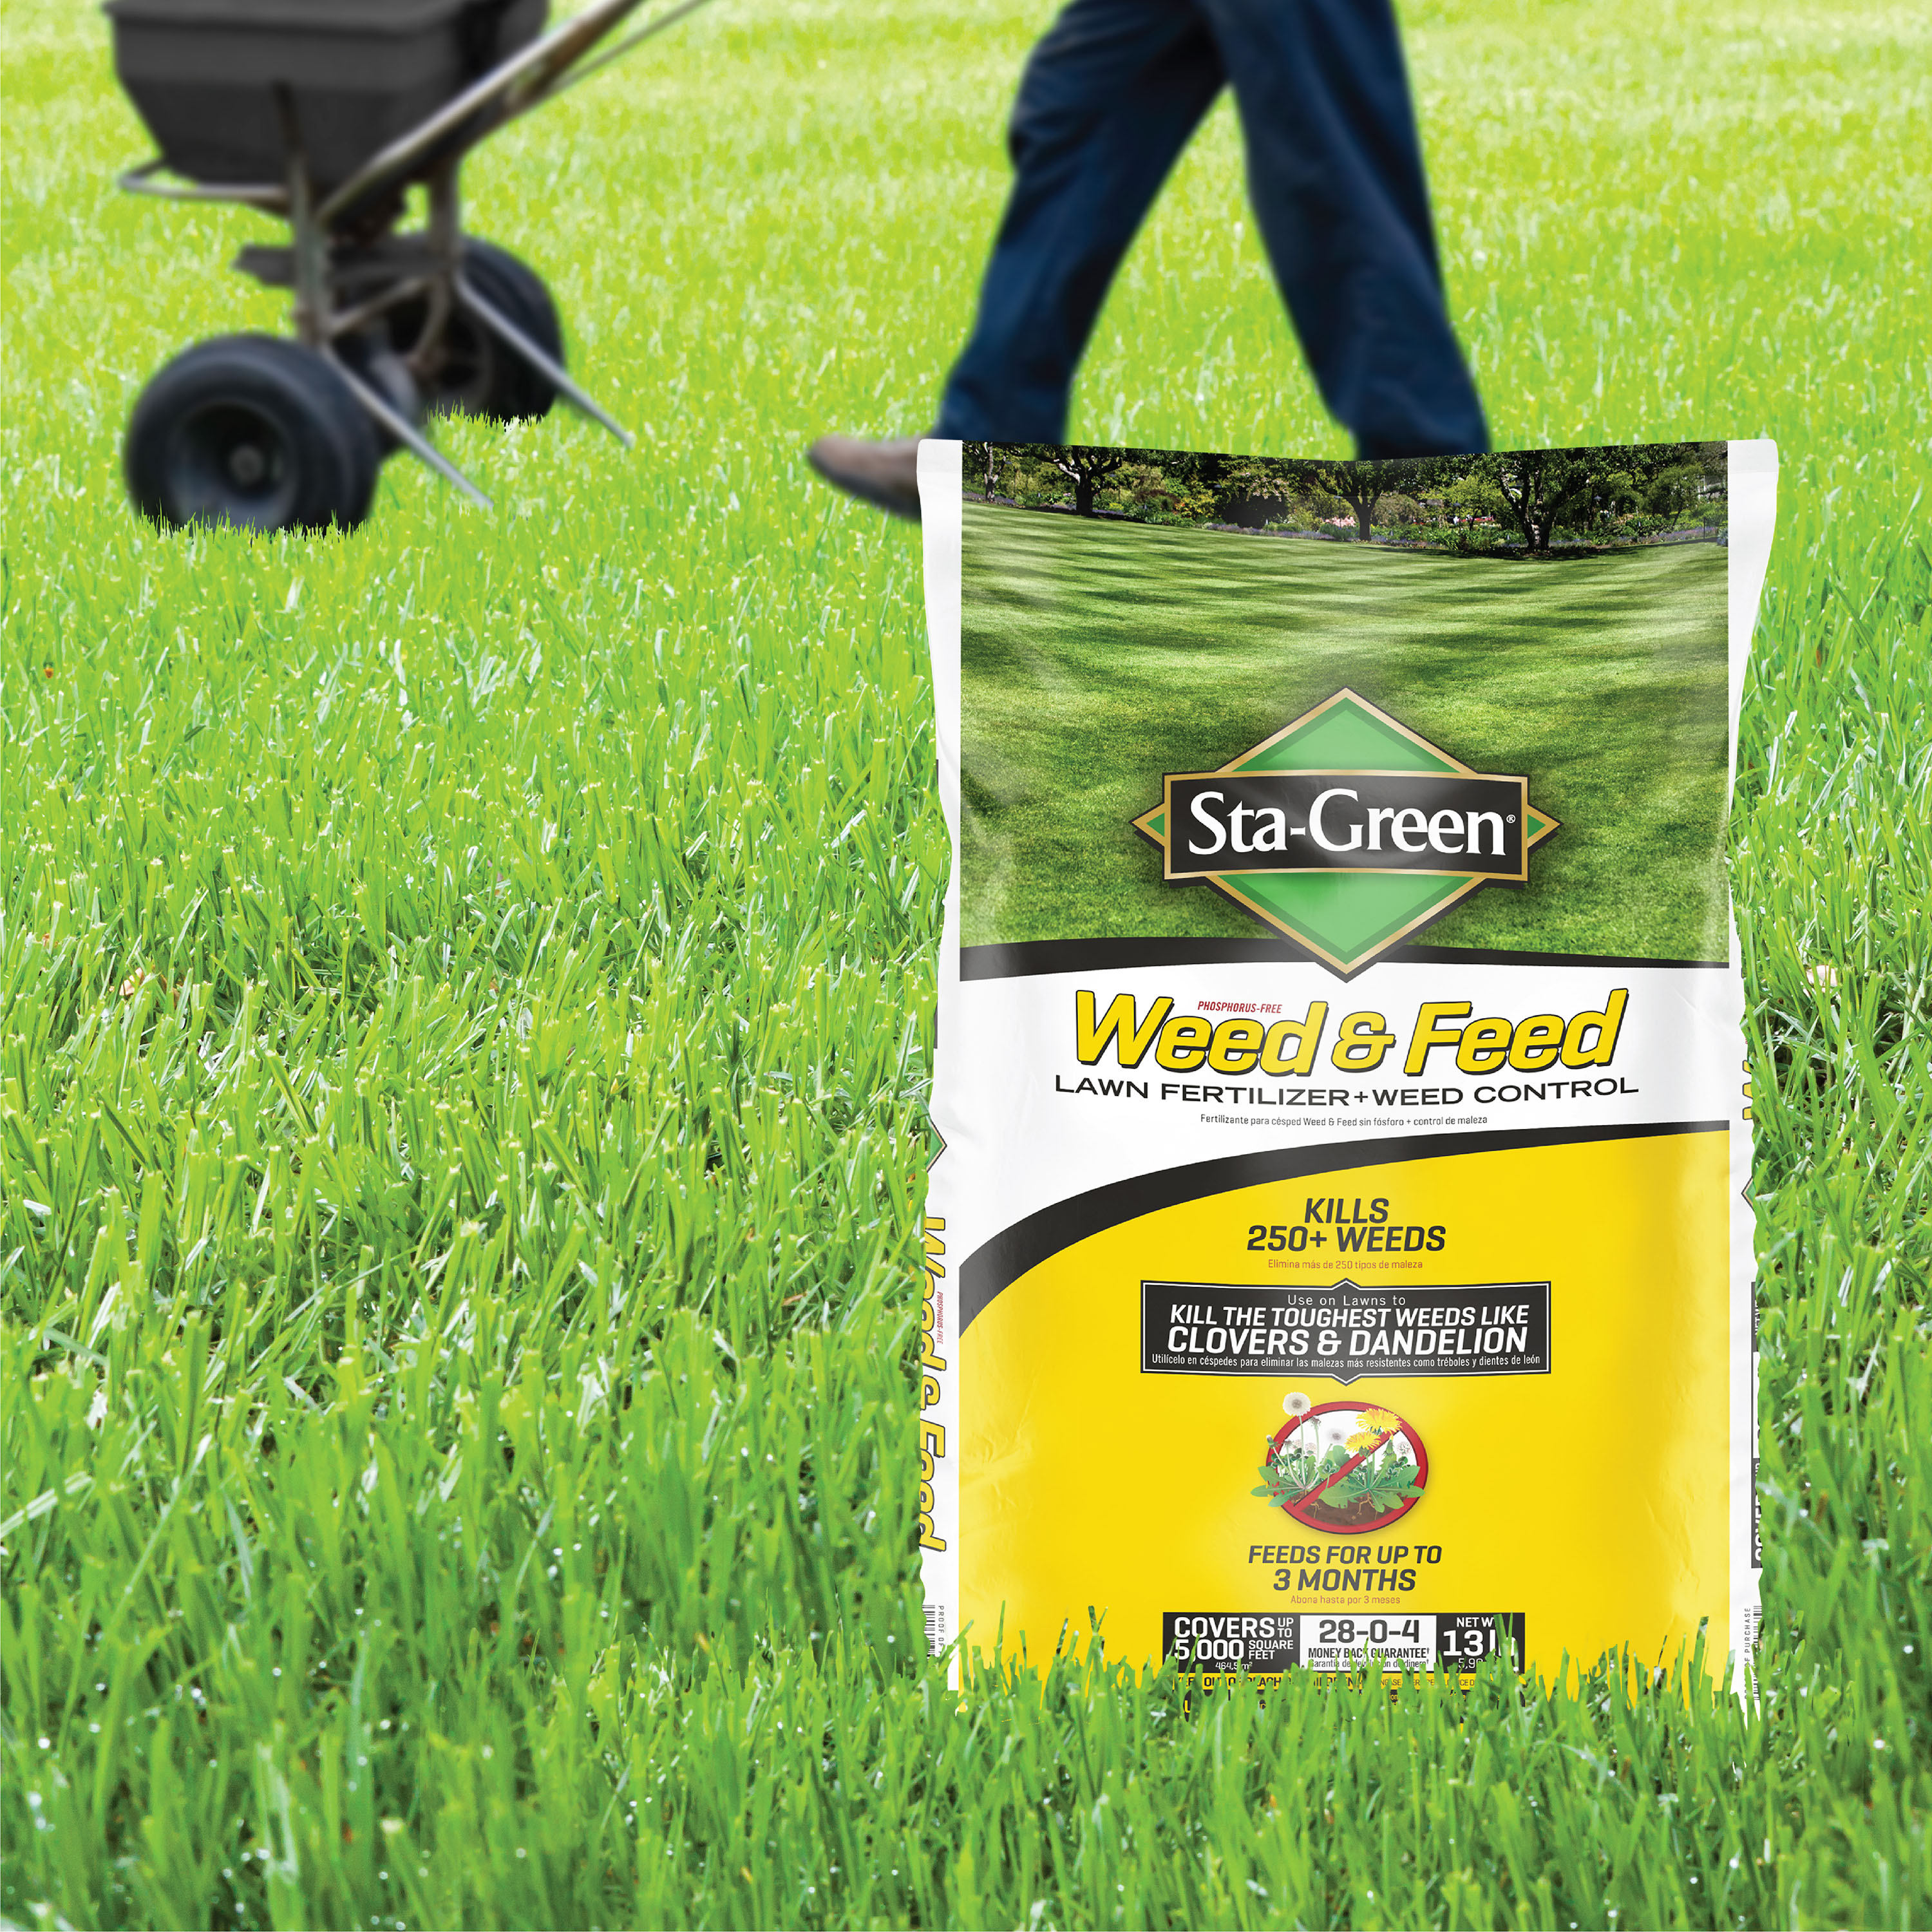 sta-green-weed-and-feed-13-lb-5000-sq-ft-28-0-4-weed-feed-fertilizer